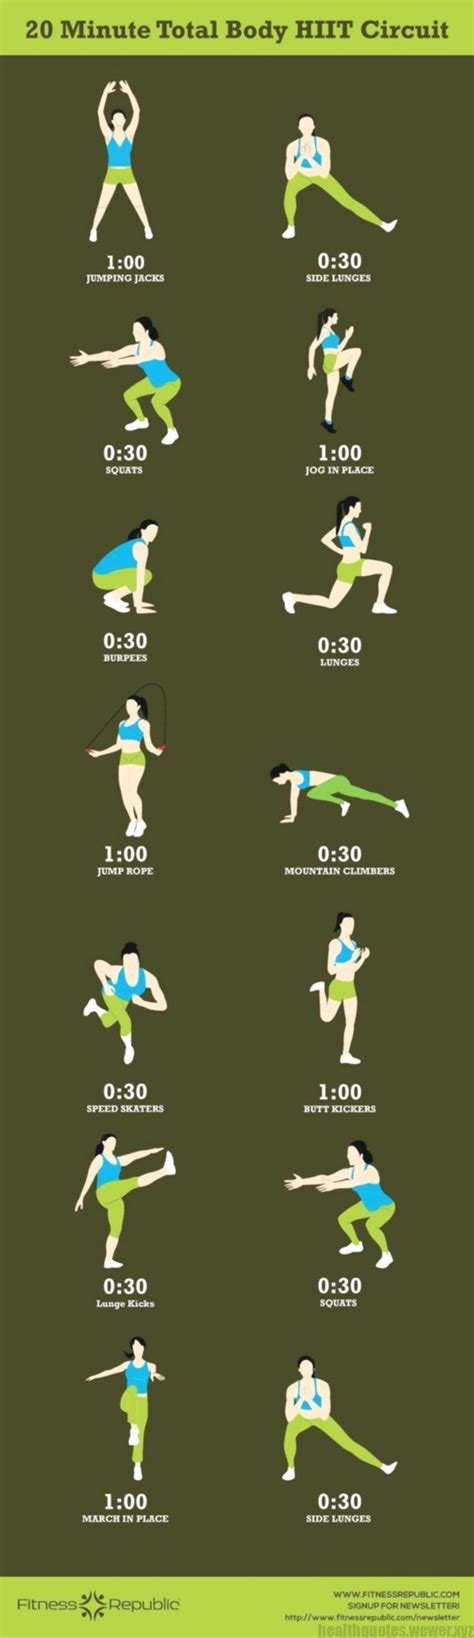 20 Minute Full Body Hiit Circuit This Is A Quick Workout Really